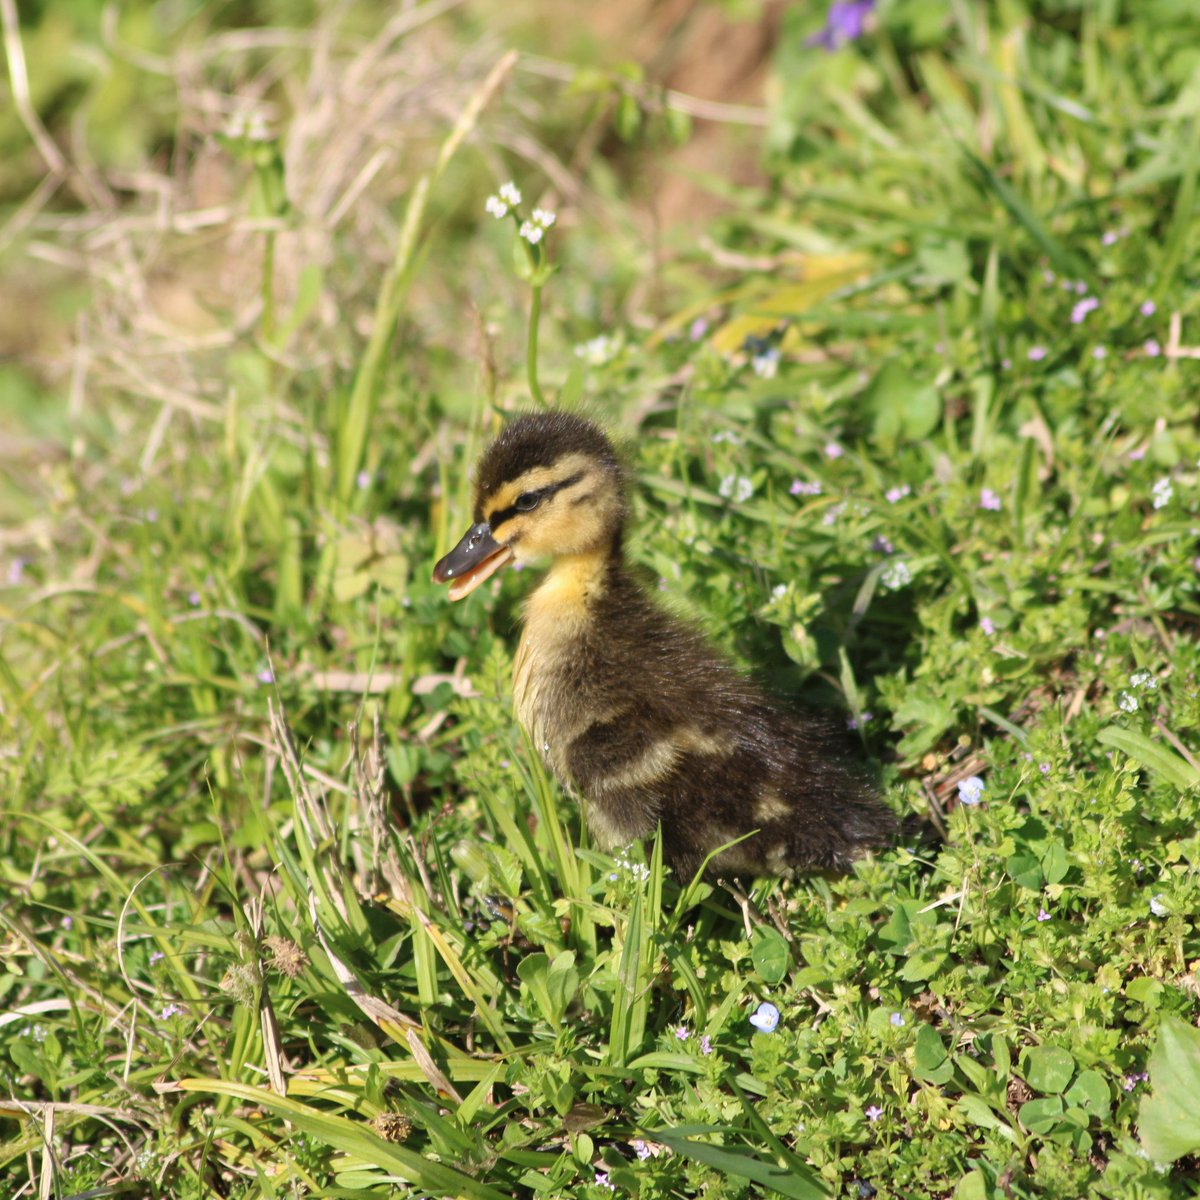 Let me know when you get tired of baby ducks.Baby duck thread - Part 5